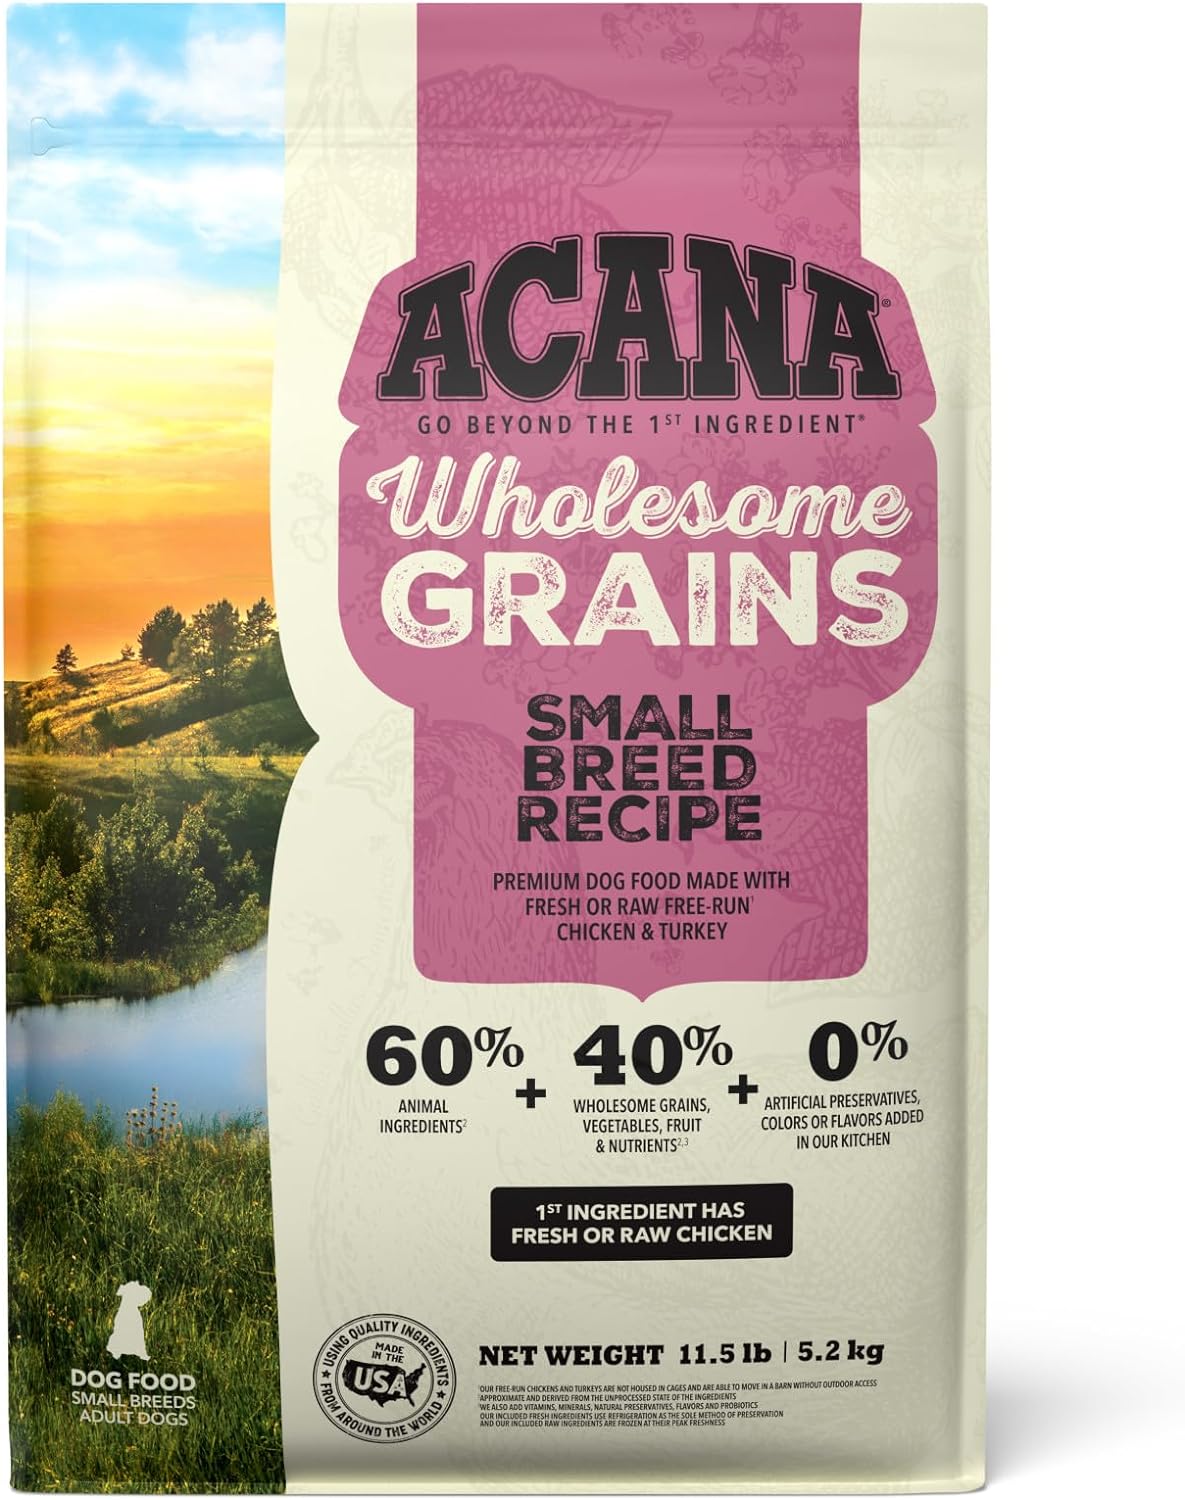 ACANA Wholesome Grains Small Breed Recipe with Real Chicken, Eggs and Turkey Dry Dog Food